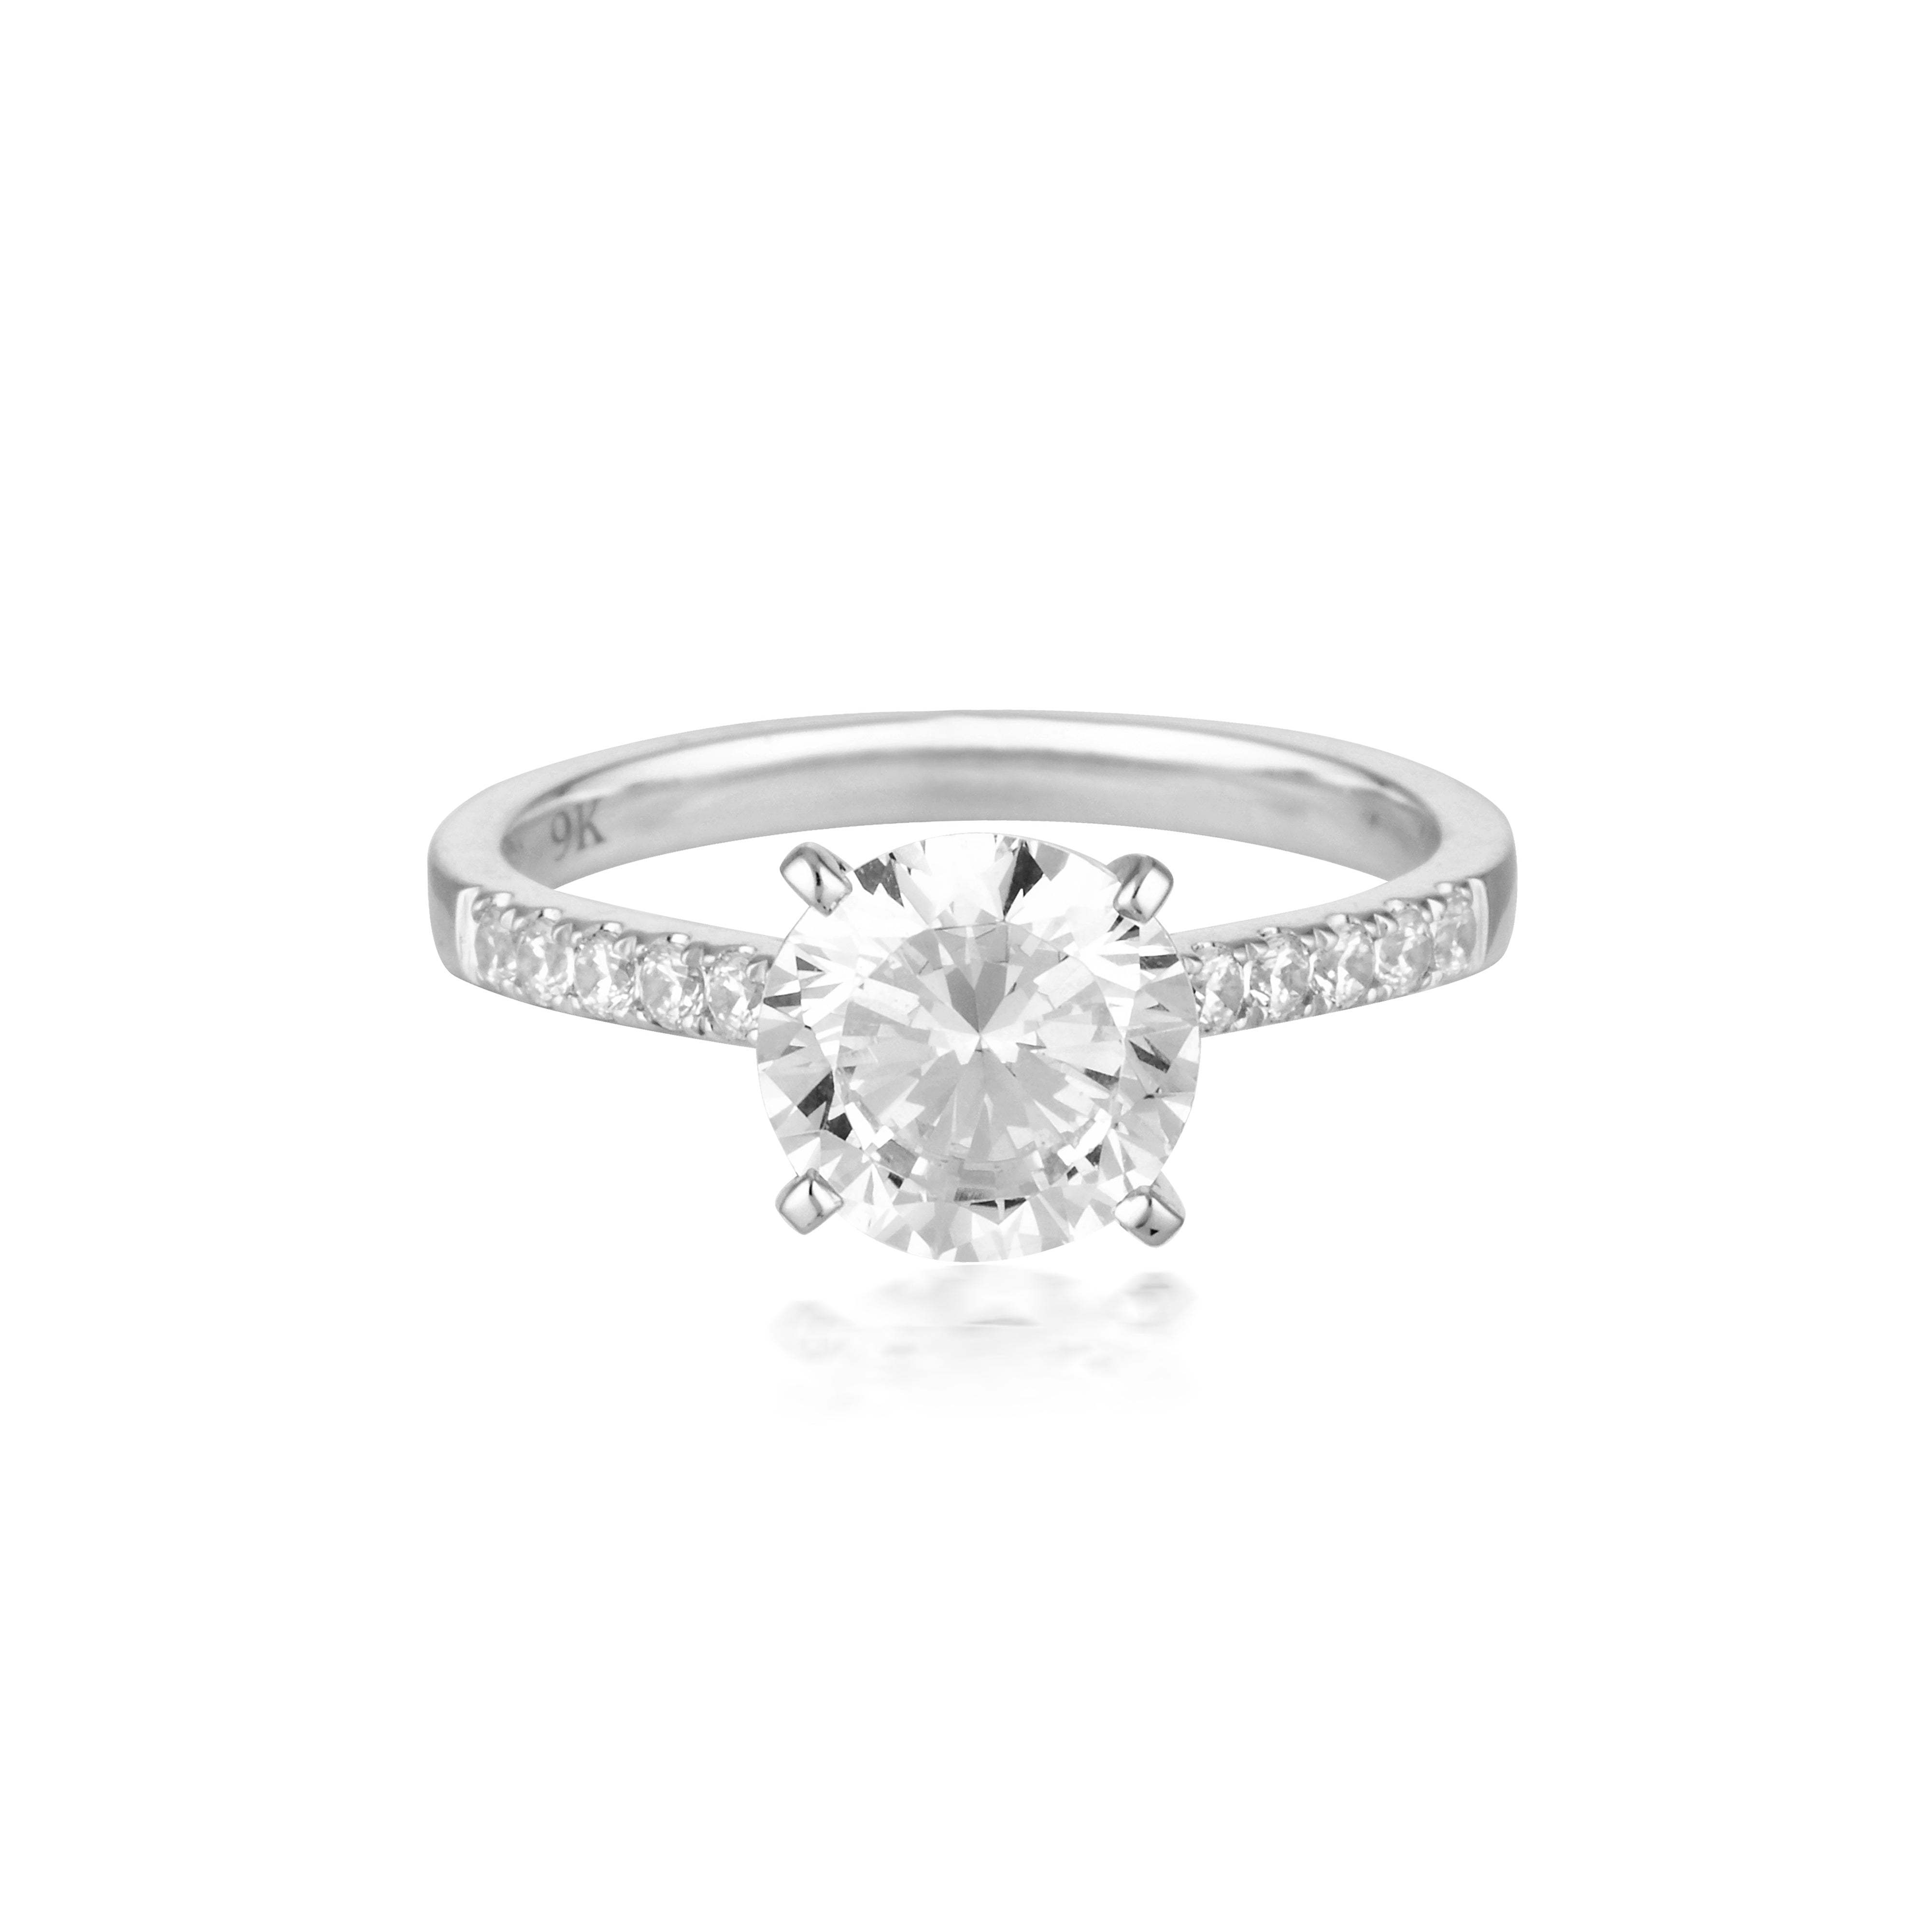 ROUND BRILLIANT CUT 2CT MOISSANITE ENGAGEMENT RING IN 9CT WHITE GOLD